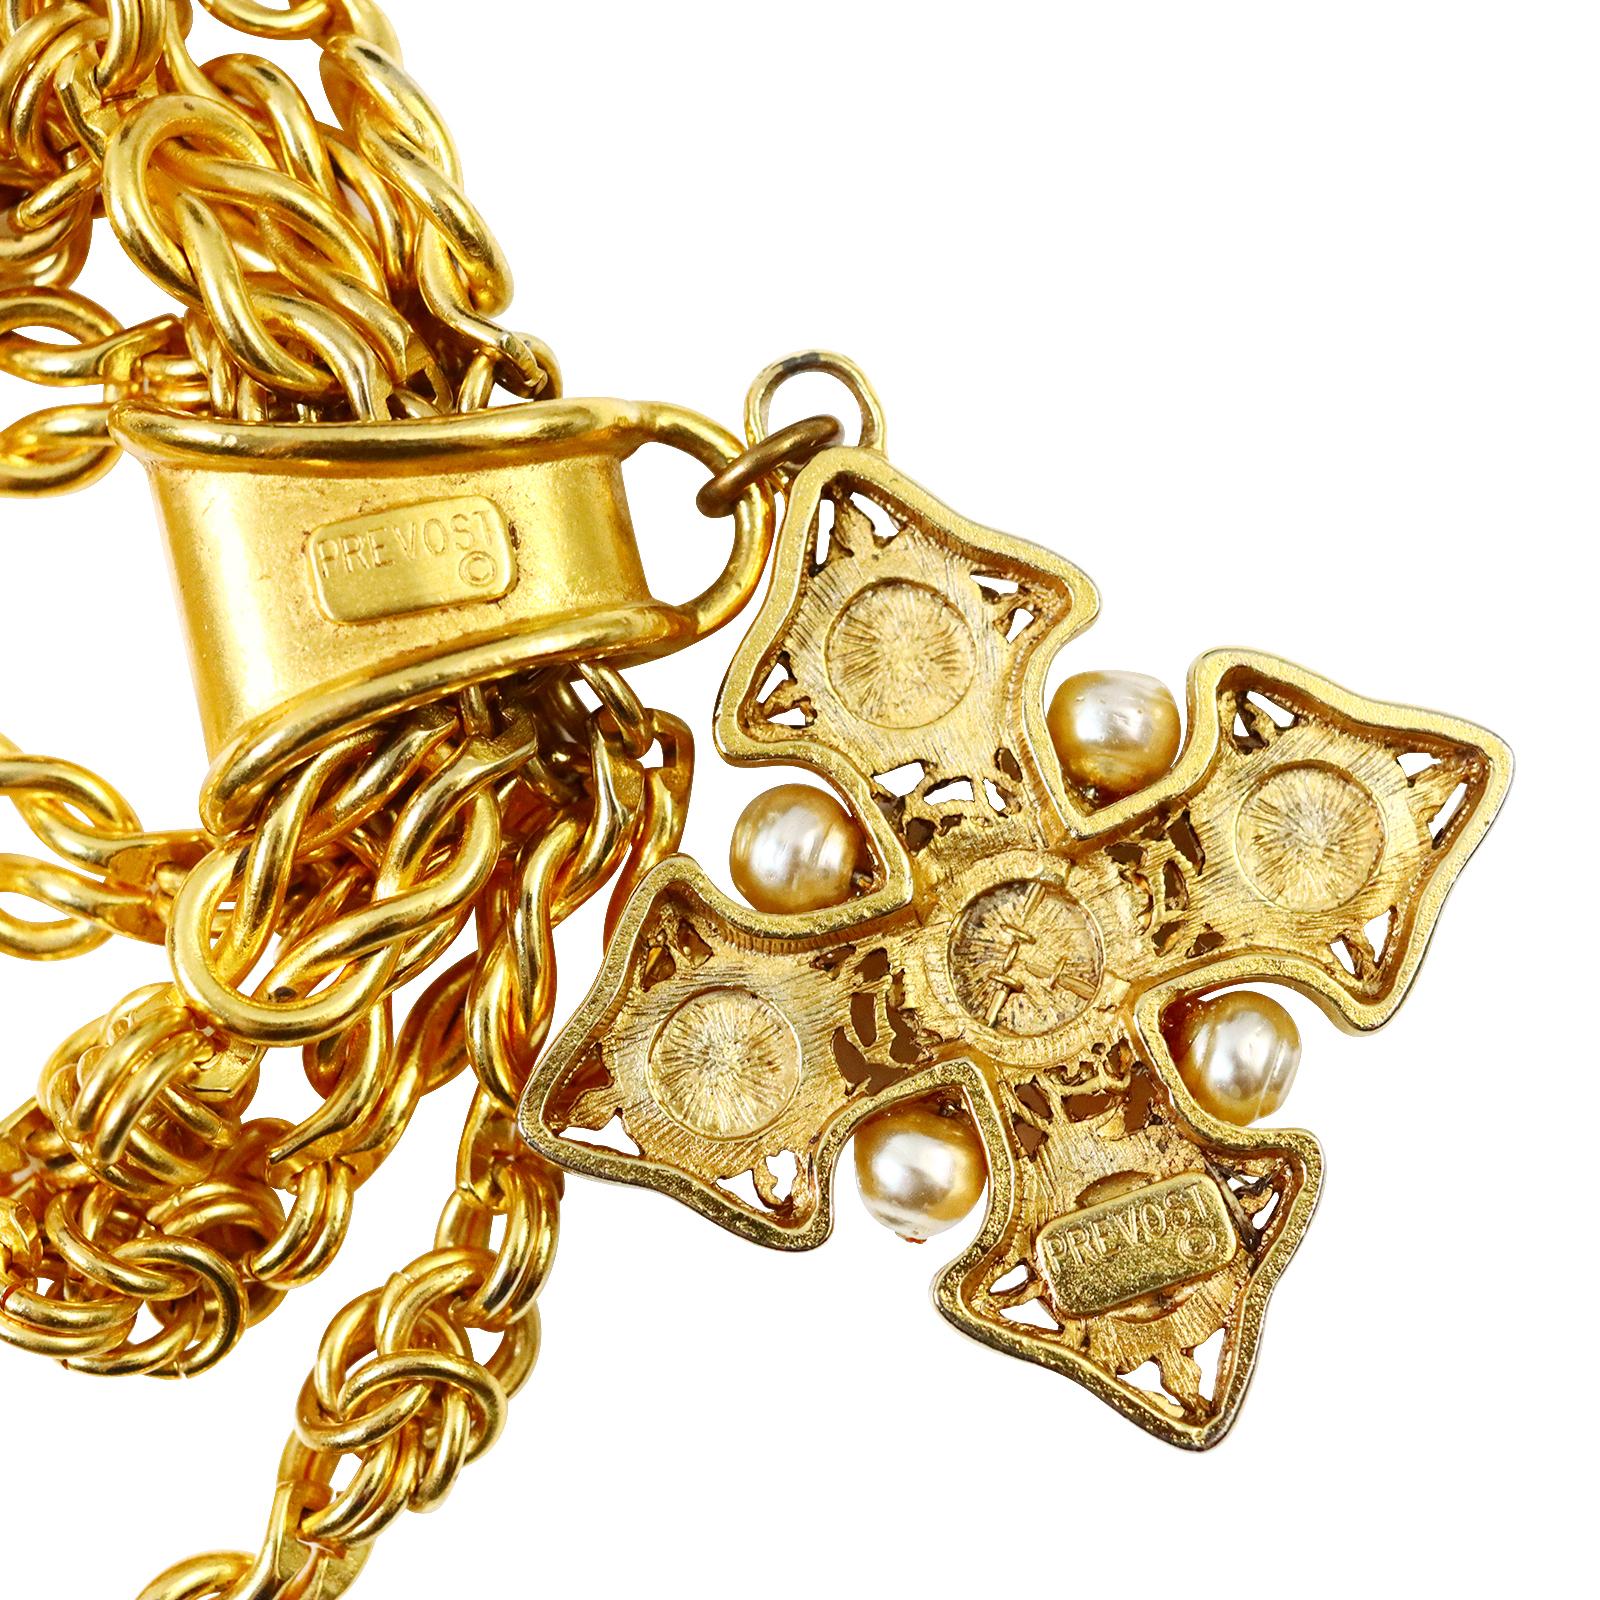 Vintage Prevost Gold 4 Strand Necklace with Dangling Maltese Cross Circa 1980s For Sale 2